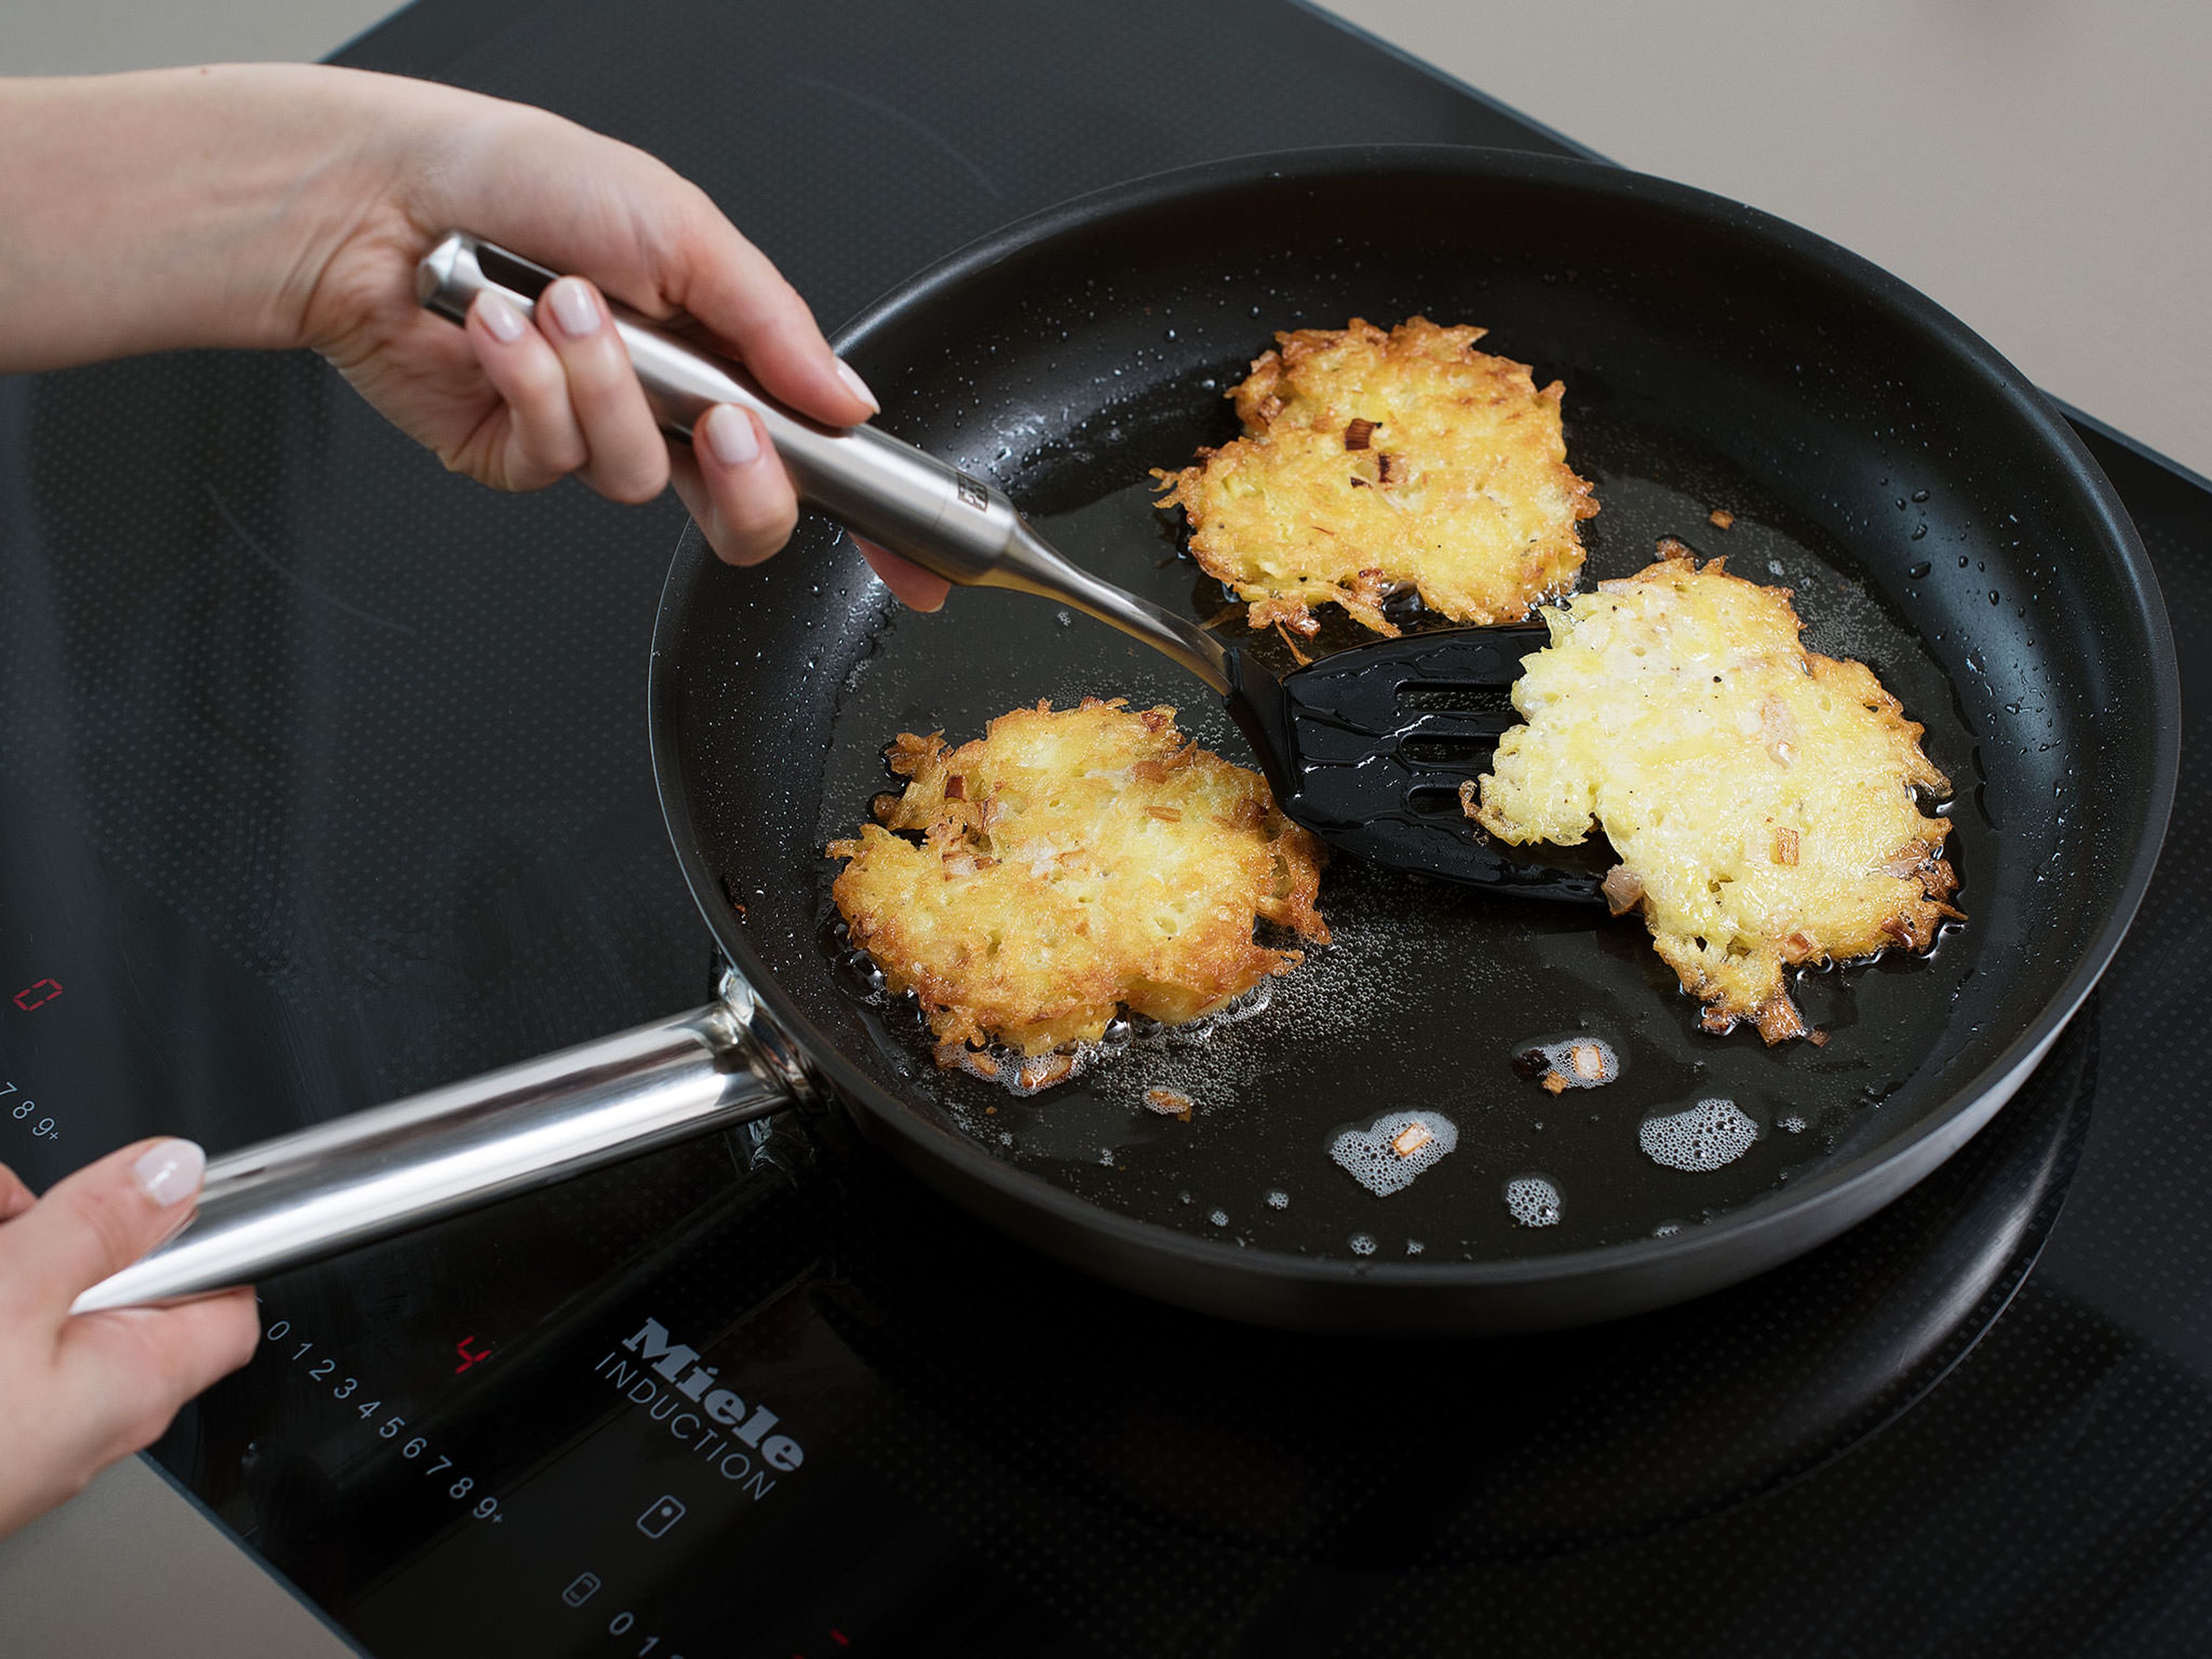 Heat sunflower oil in frying pan over medium-high heat. Add potato mixture 1 tbsp. at a time to pan and press down to make latke approx. 1 cm/ 0.5 in.-thick. Fry on both sides fro approx. 5 min., or until golden brown. Transfer to a paper towel-lined plate and serve warm with applesauce. Enjoy!